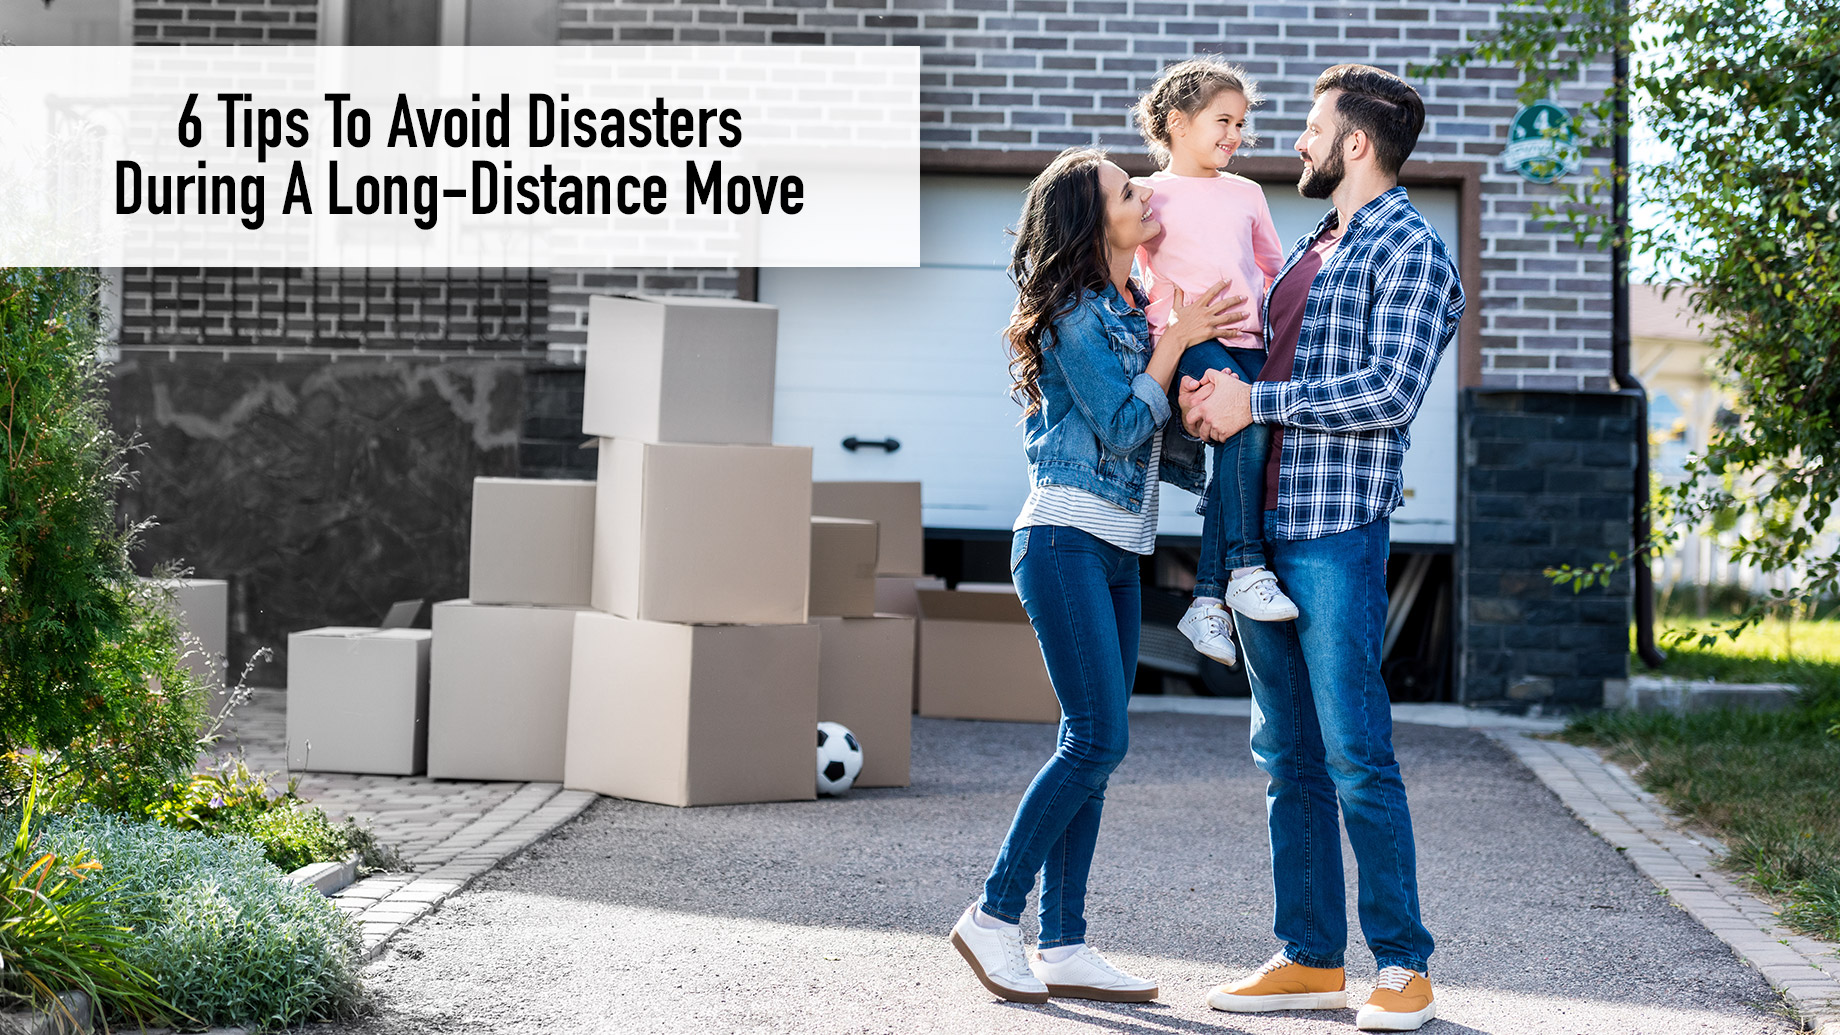 6 Tips To Avoid Disasters During A Long-Distance Move